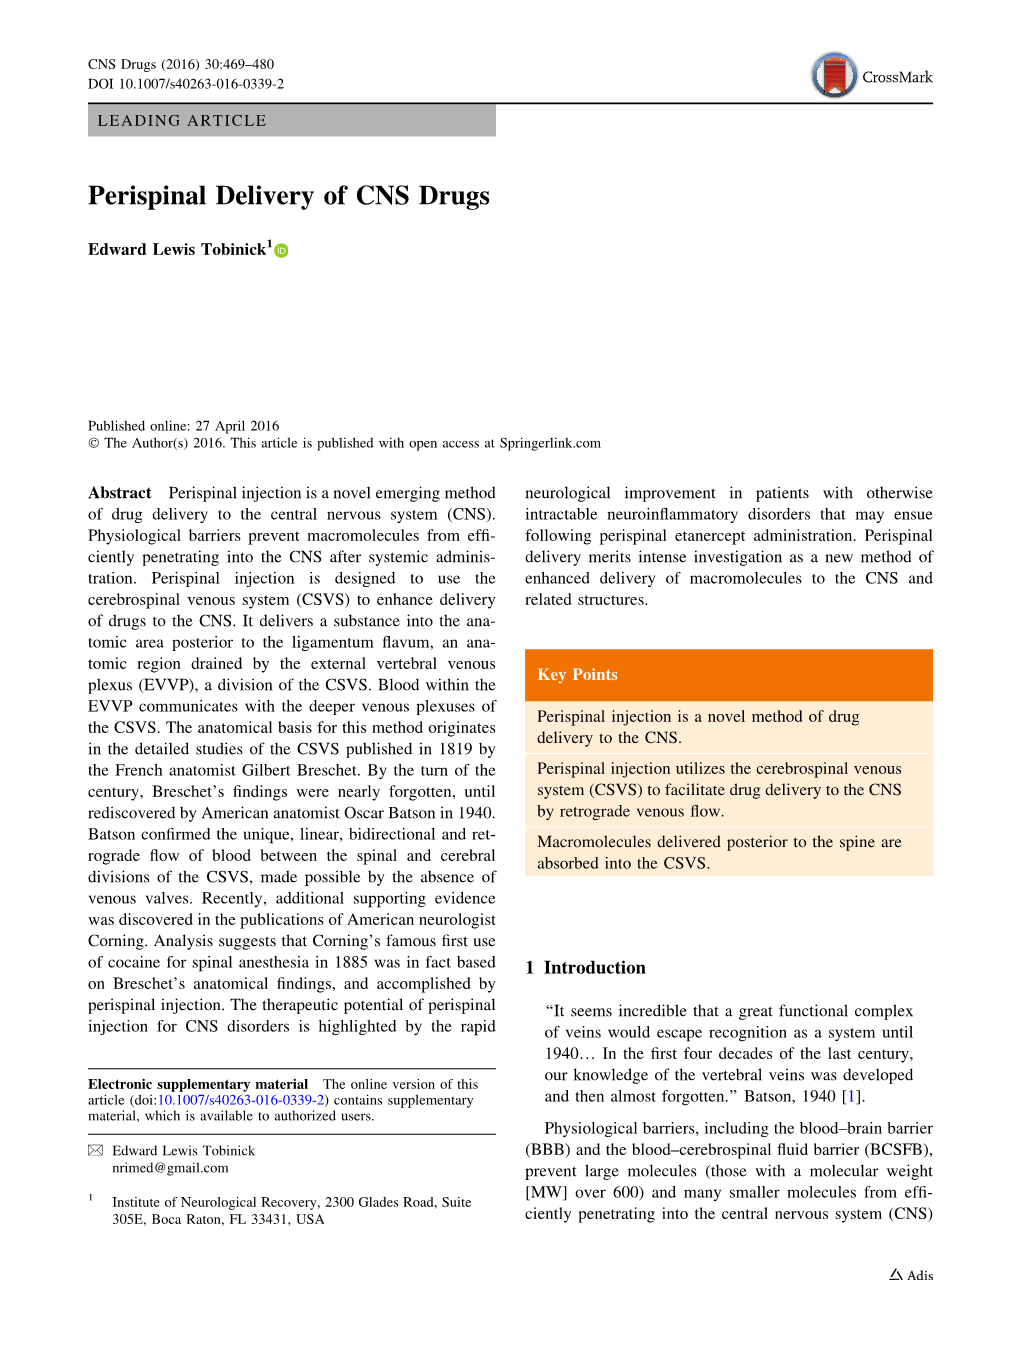 Perispinal Delivery of CNS Drugs